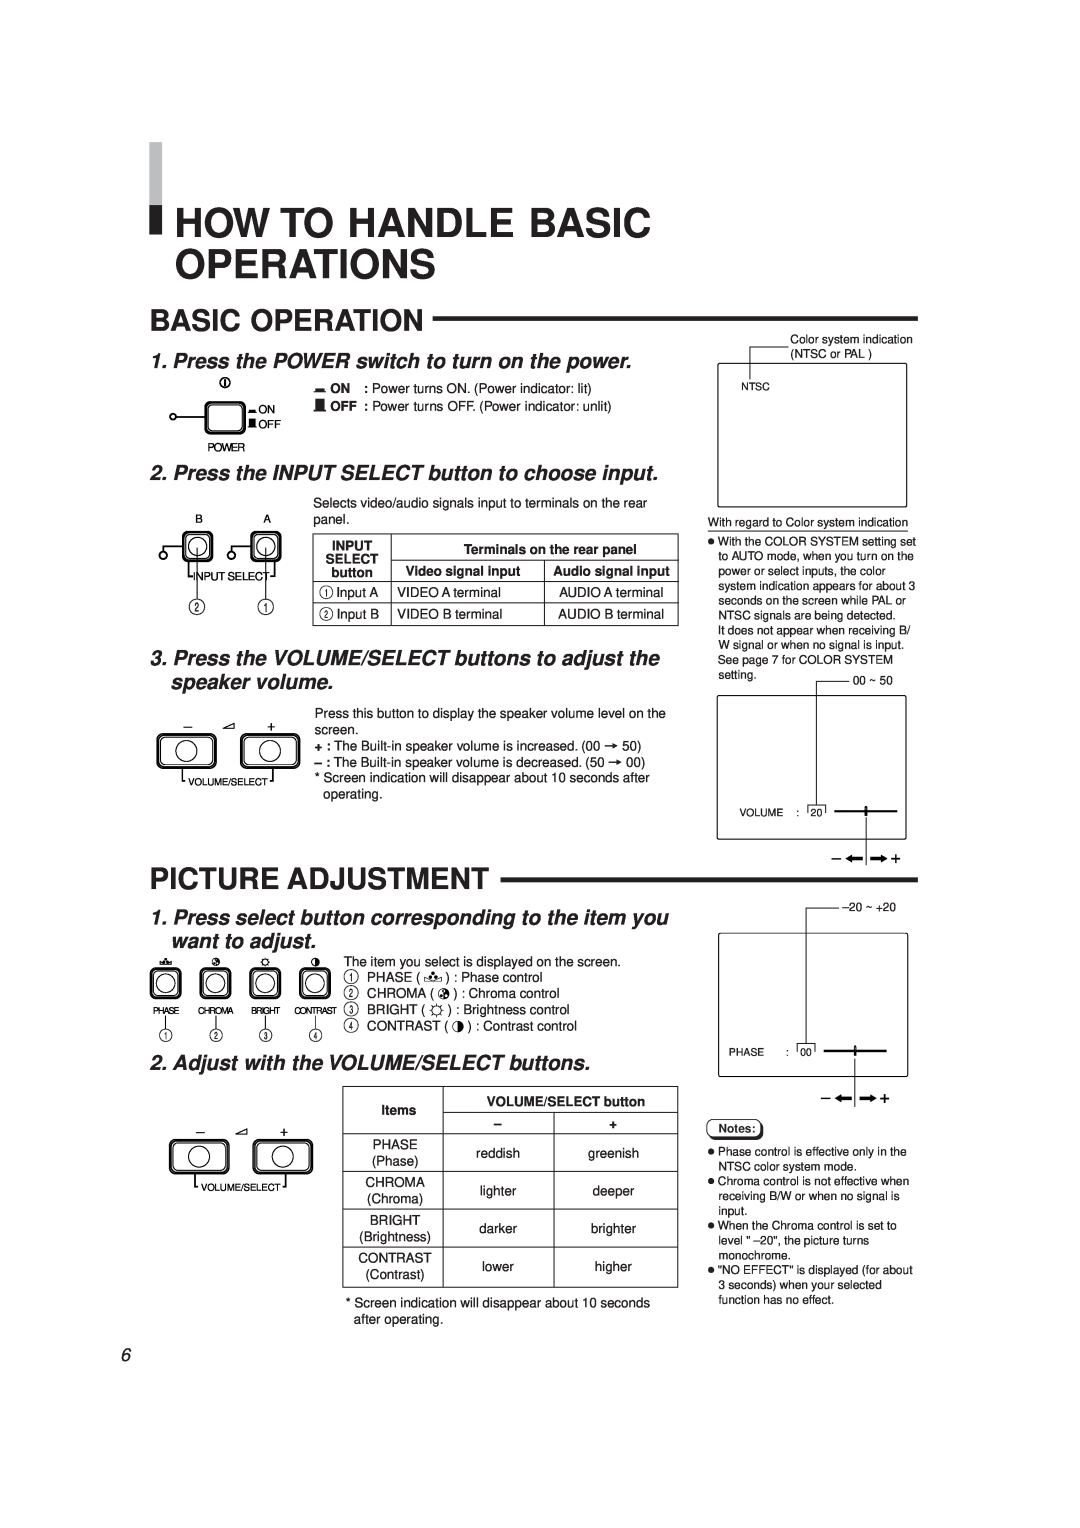 JVC TM-A130SU manual How To Handle Basic Operations, Picture Adjustment, Press the POWER switch to turn on the power 